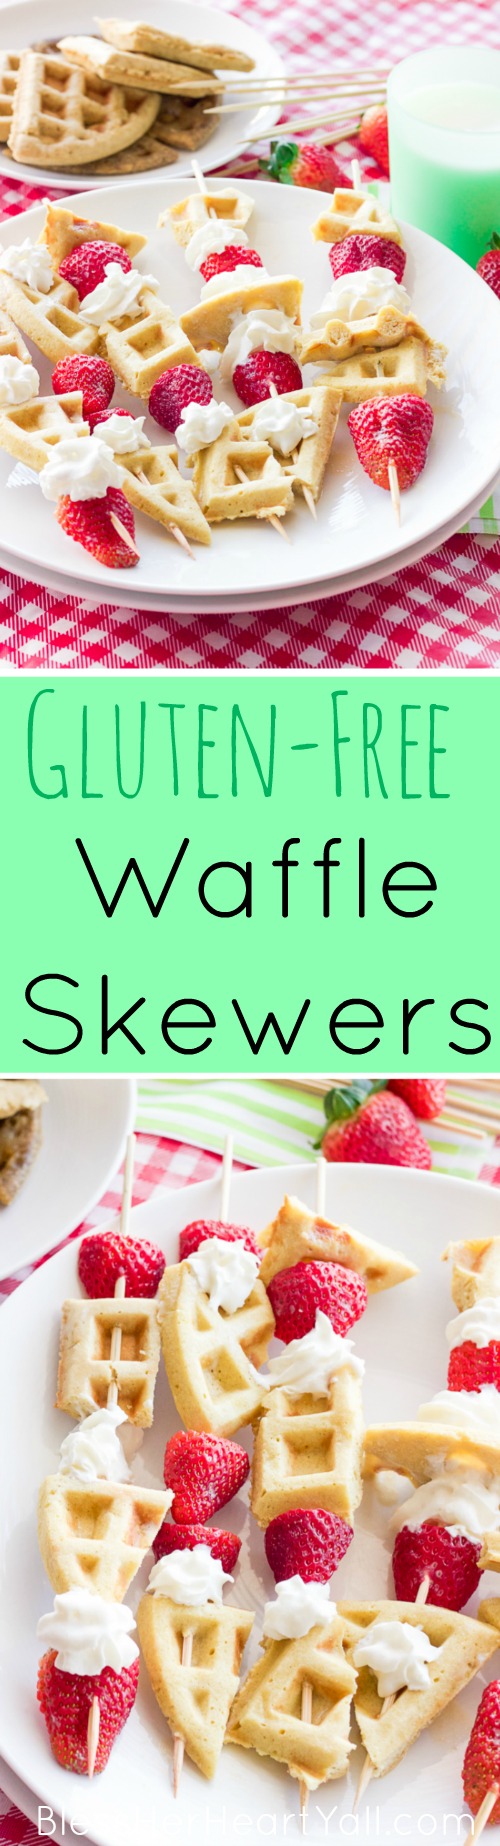 These gluten-free waffle skewers make breakfast fun and tasty.  The sweet brown sugar waffles go great with fresh berries and creamy whipped cream.  And the best part?  Breakfast is on a stick!